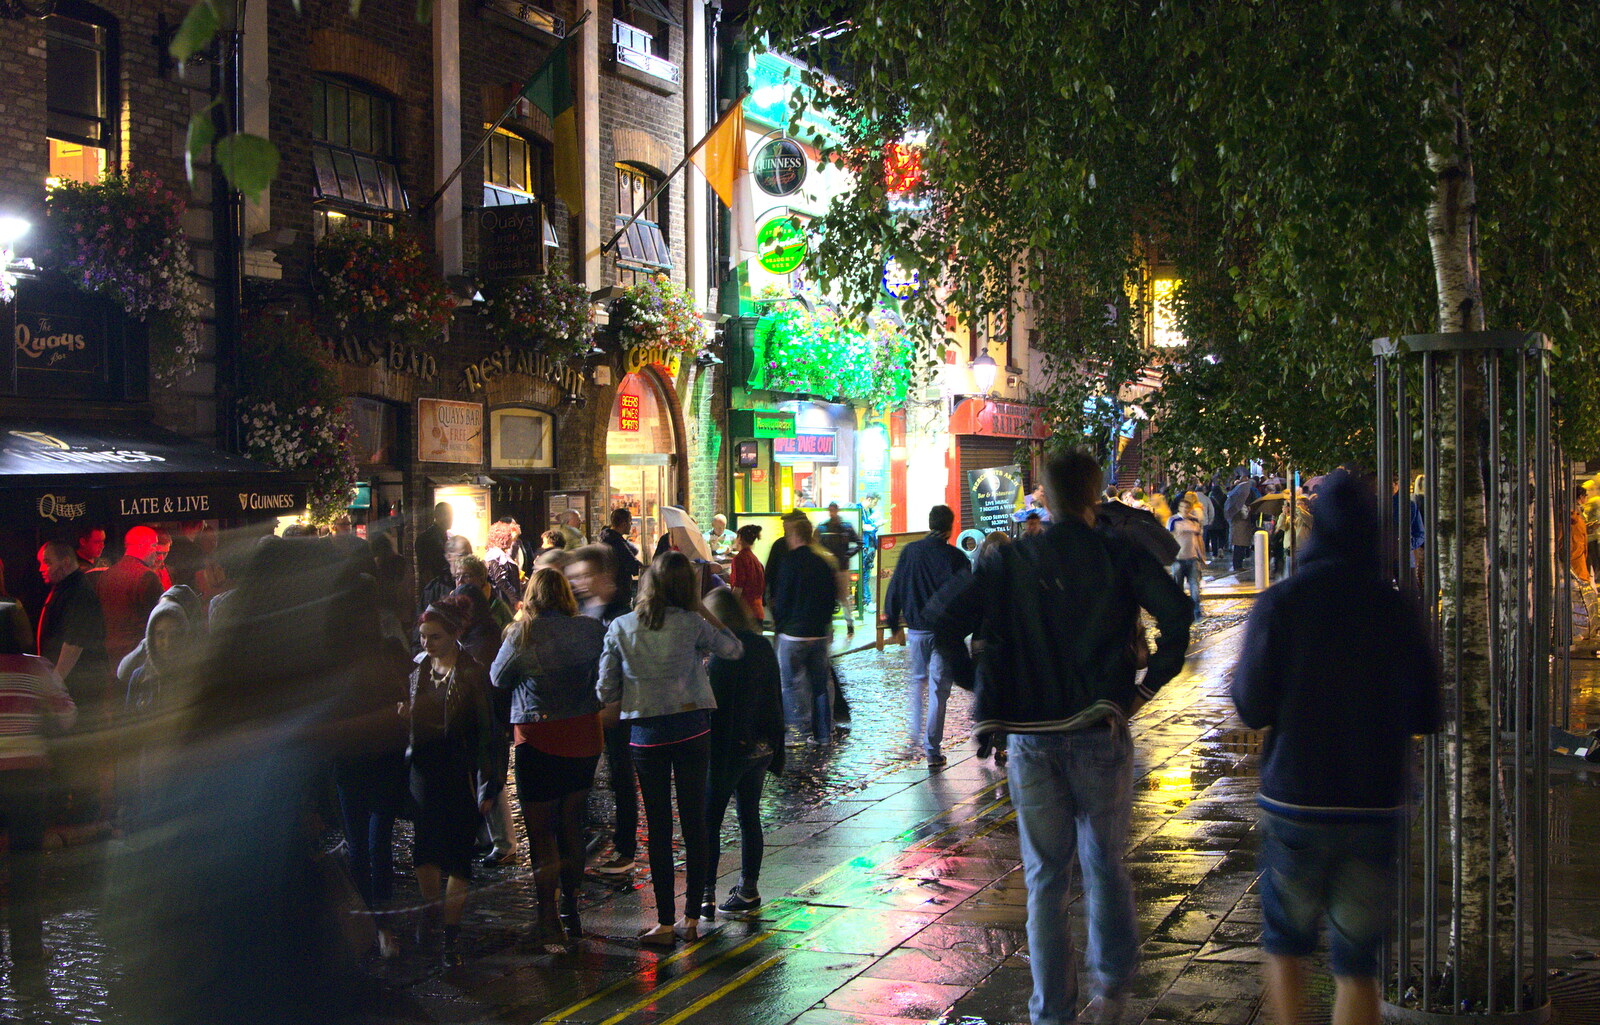 More action in Temple Bar from A Night Out in Dublin, County Dublin, Ireland - 9th August 2014